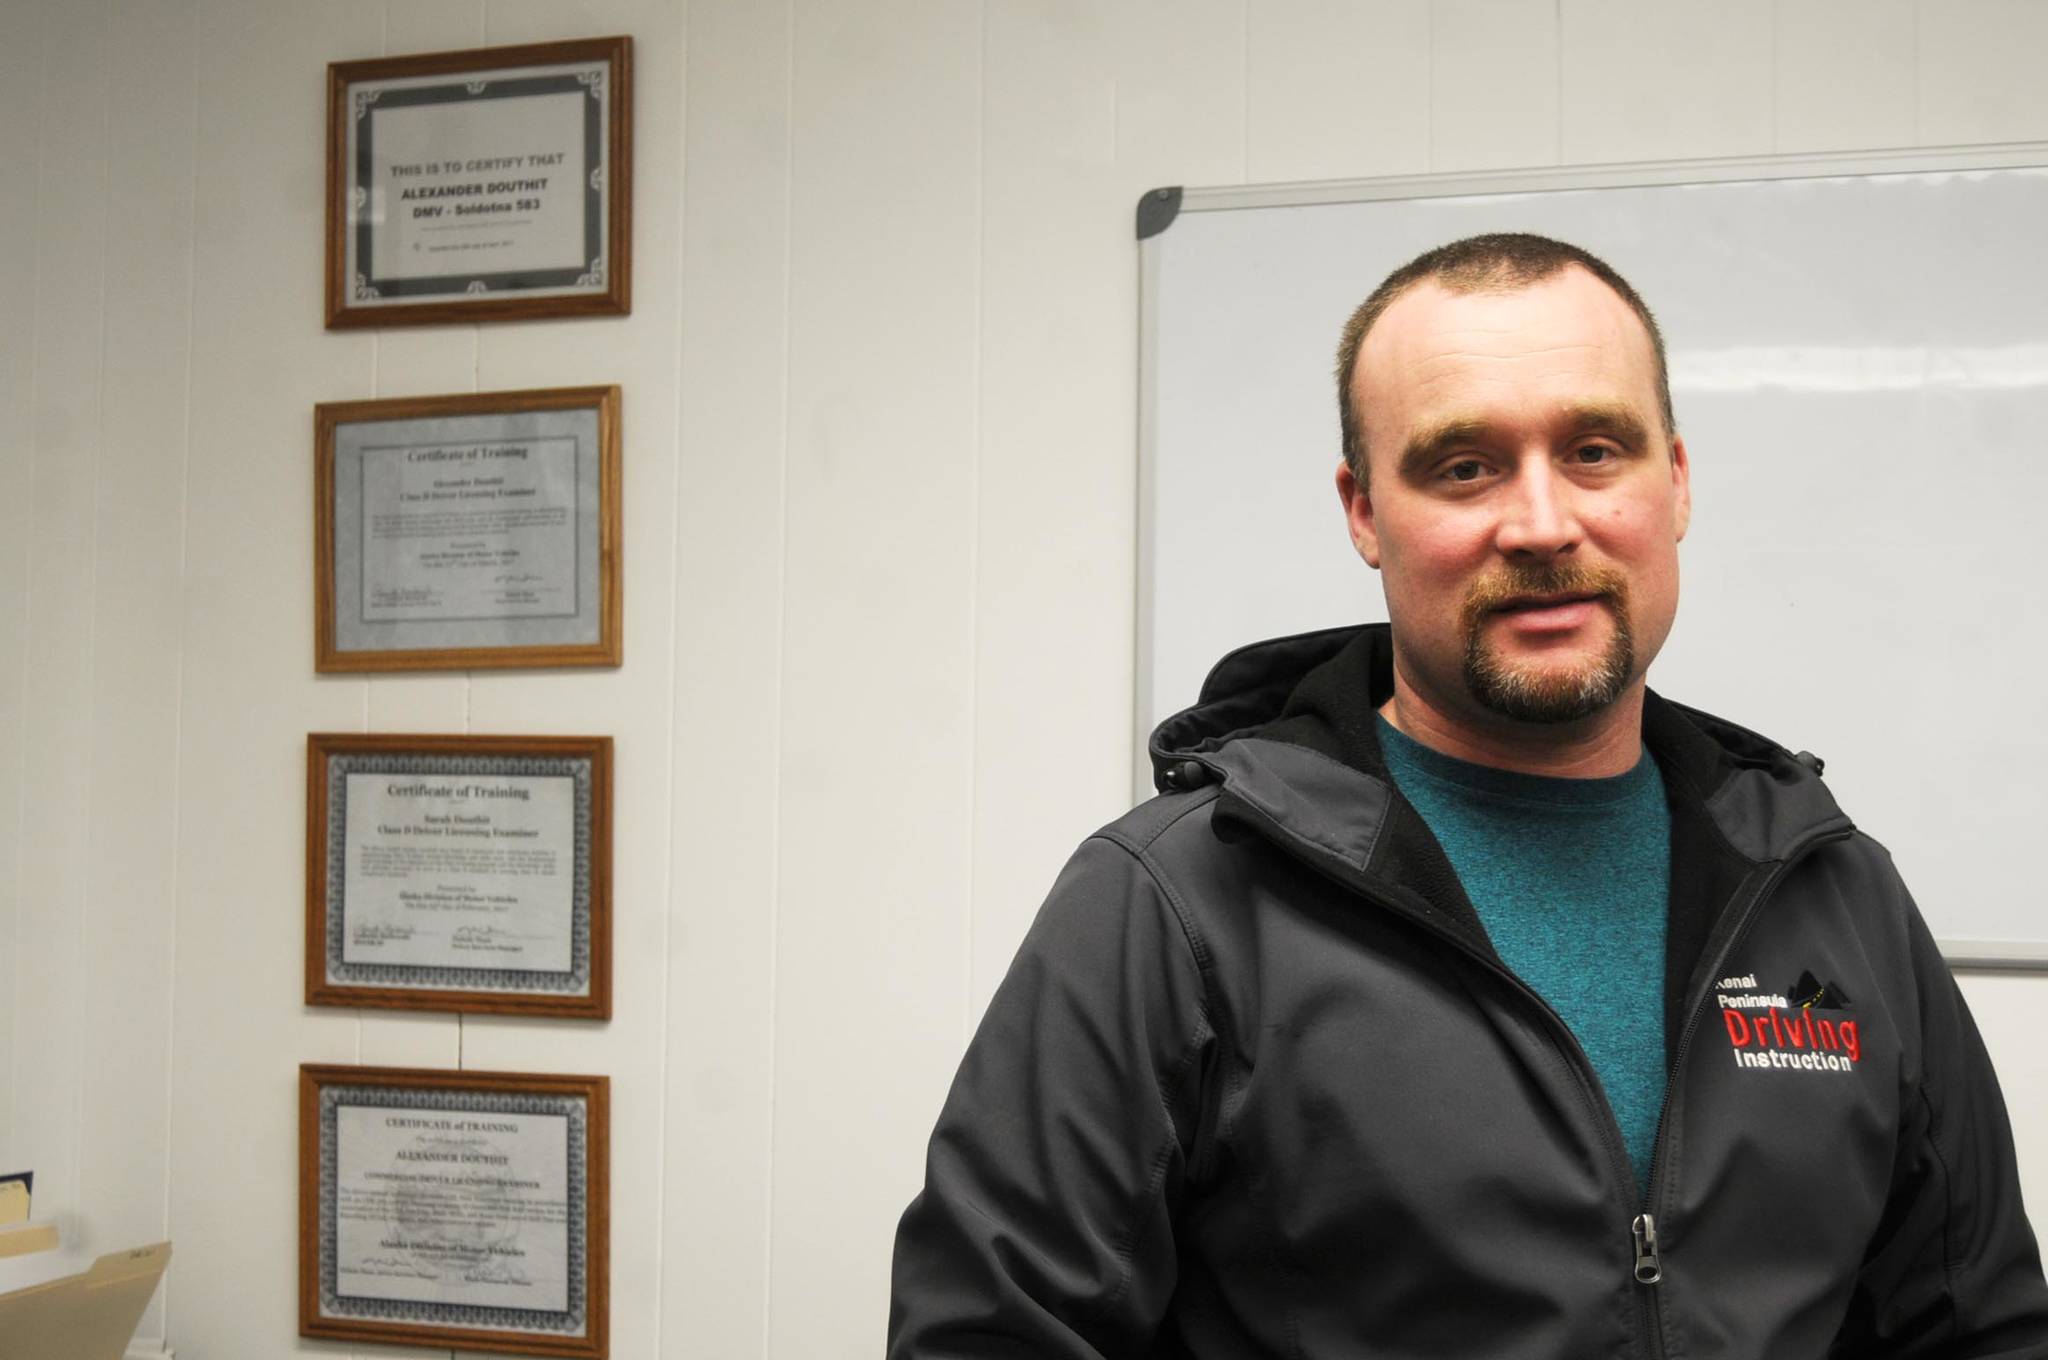 Alex Douthit, pictured in his office on Monday, Jan. 15, 2018 in Kenai, Alaska, founded Kenai Peninsula Driving Instruction in November 2016 with his wife Sarah Douthit. It took them more than a year to obtain all the permits and approvals they needed to officially begin commercial driver’s license instruction, which they are now focusing on. (Photo by Elizabeth Earl/Peninsula Clarion)